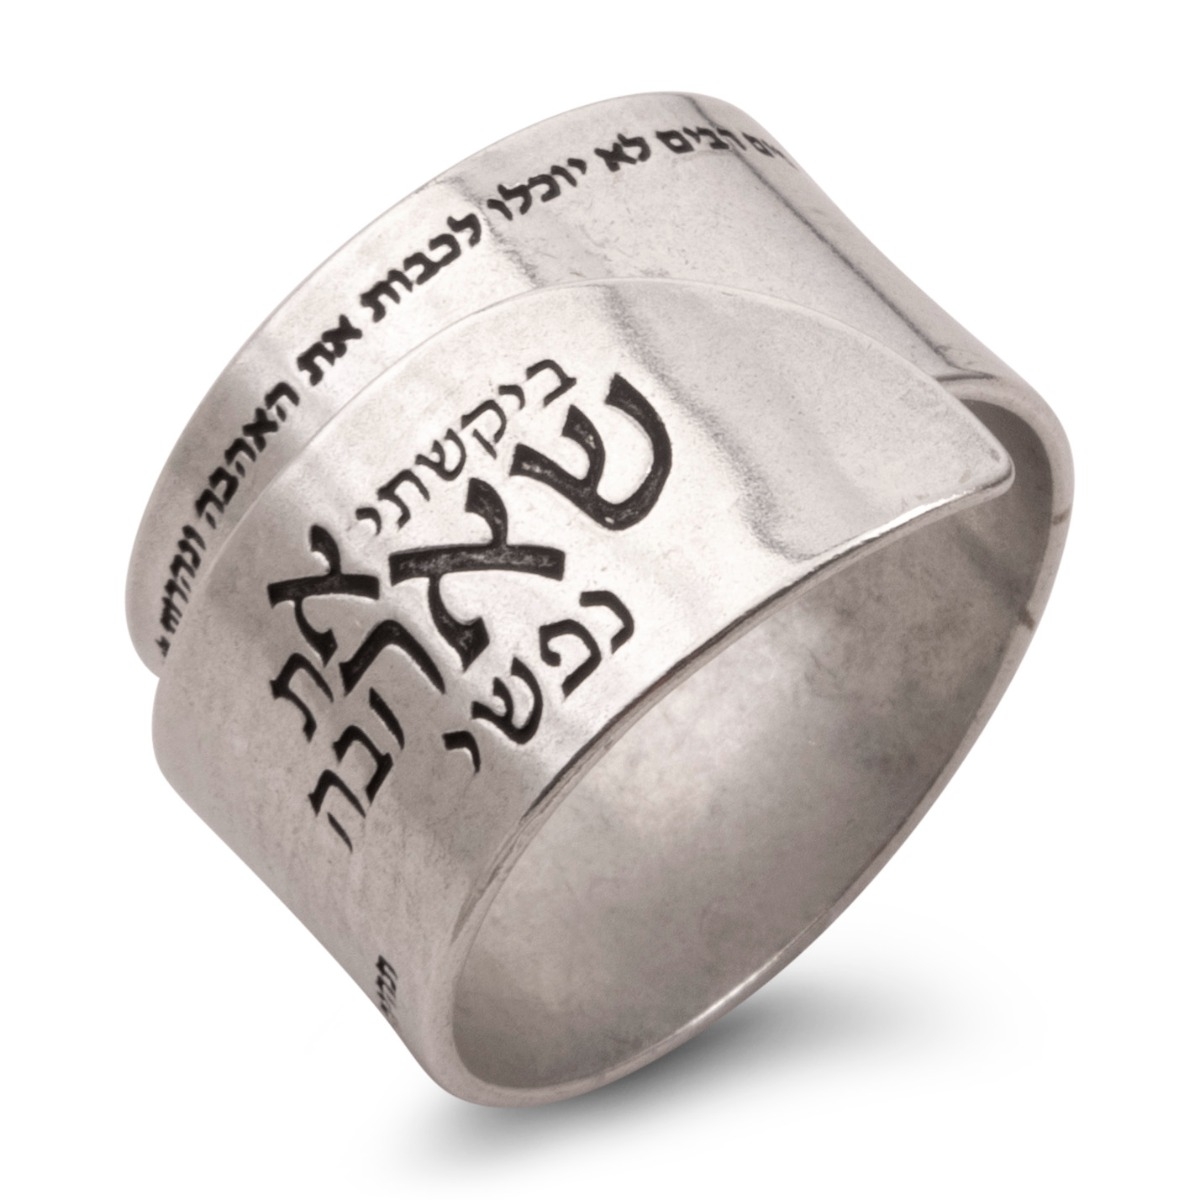 Handmade Blackened 925 Sterling Silver Adjustable Unisex Ring – The One My Soul Loves (Song of Songs 3:1) - 1